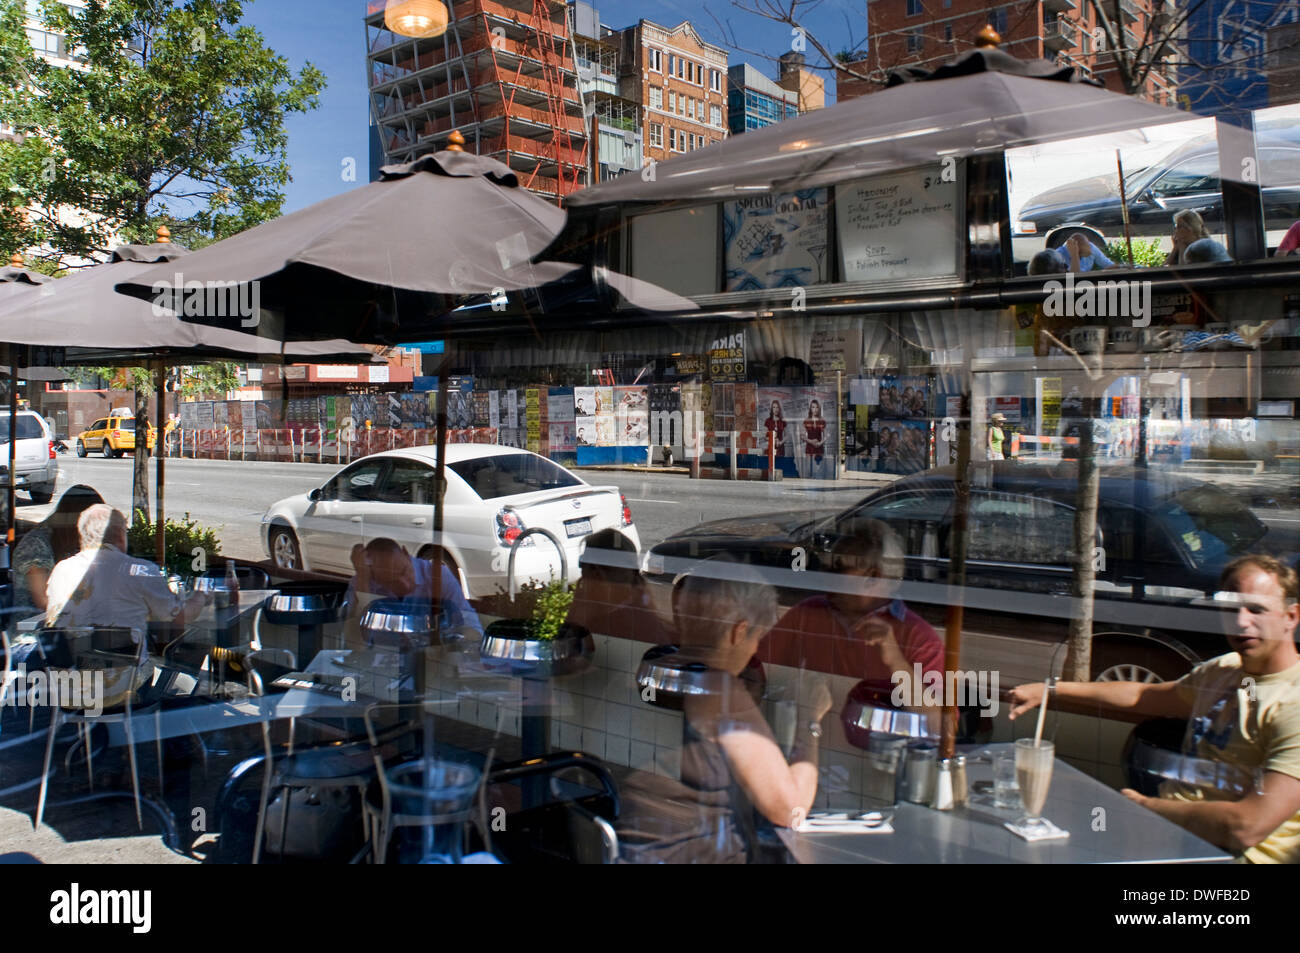 The Emire Diner restaurant is located in the Chelsea neighborhood, 210 10th Avenue. Funny how a site which today seems retro was Stock Photo